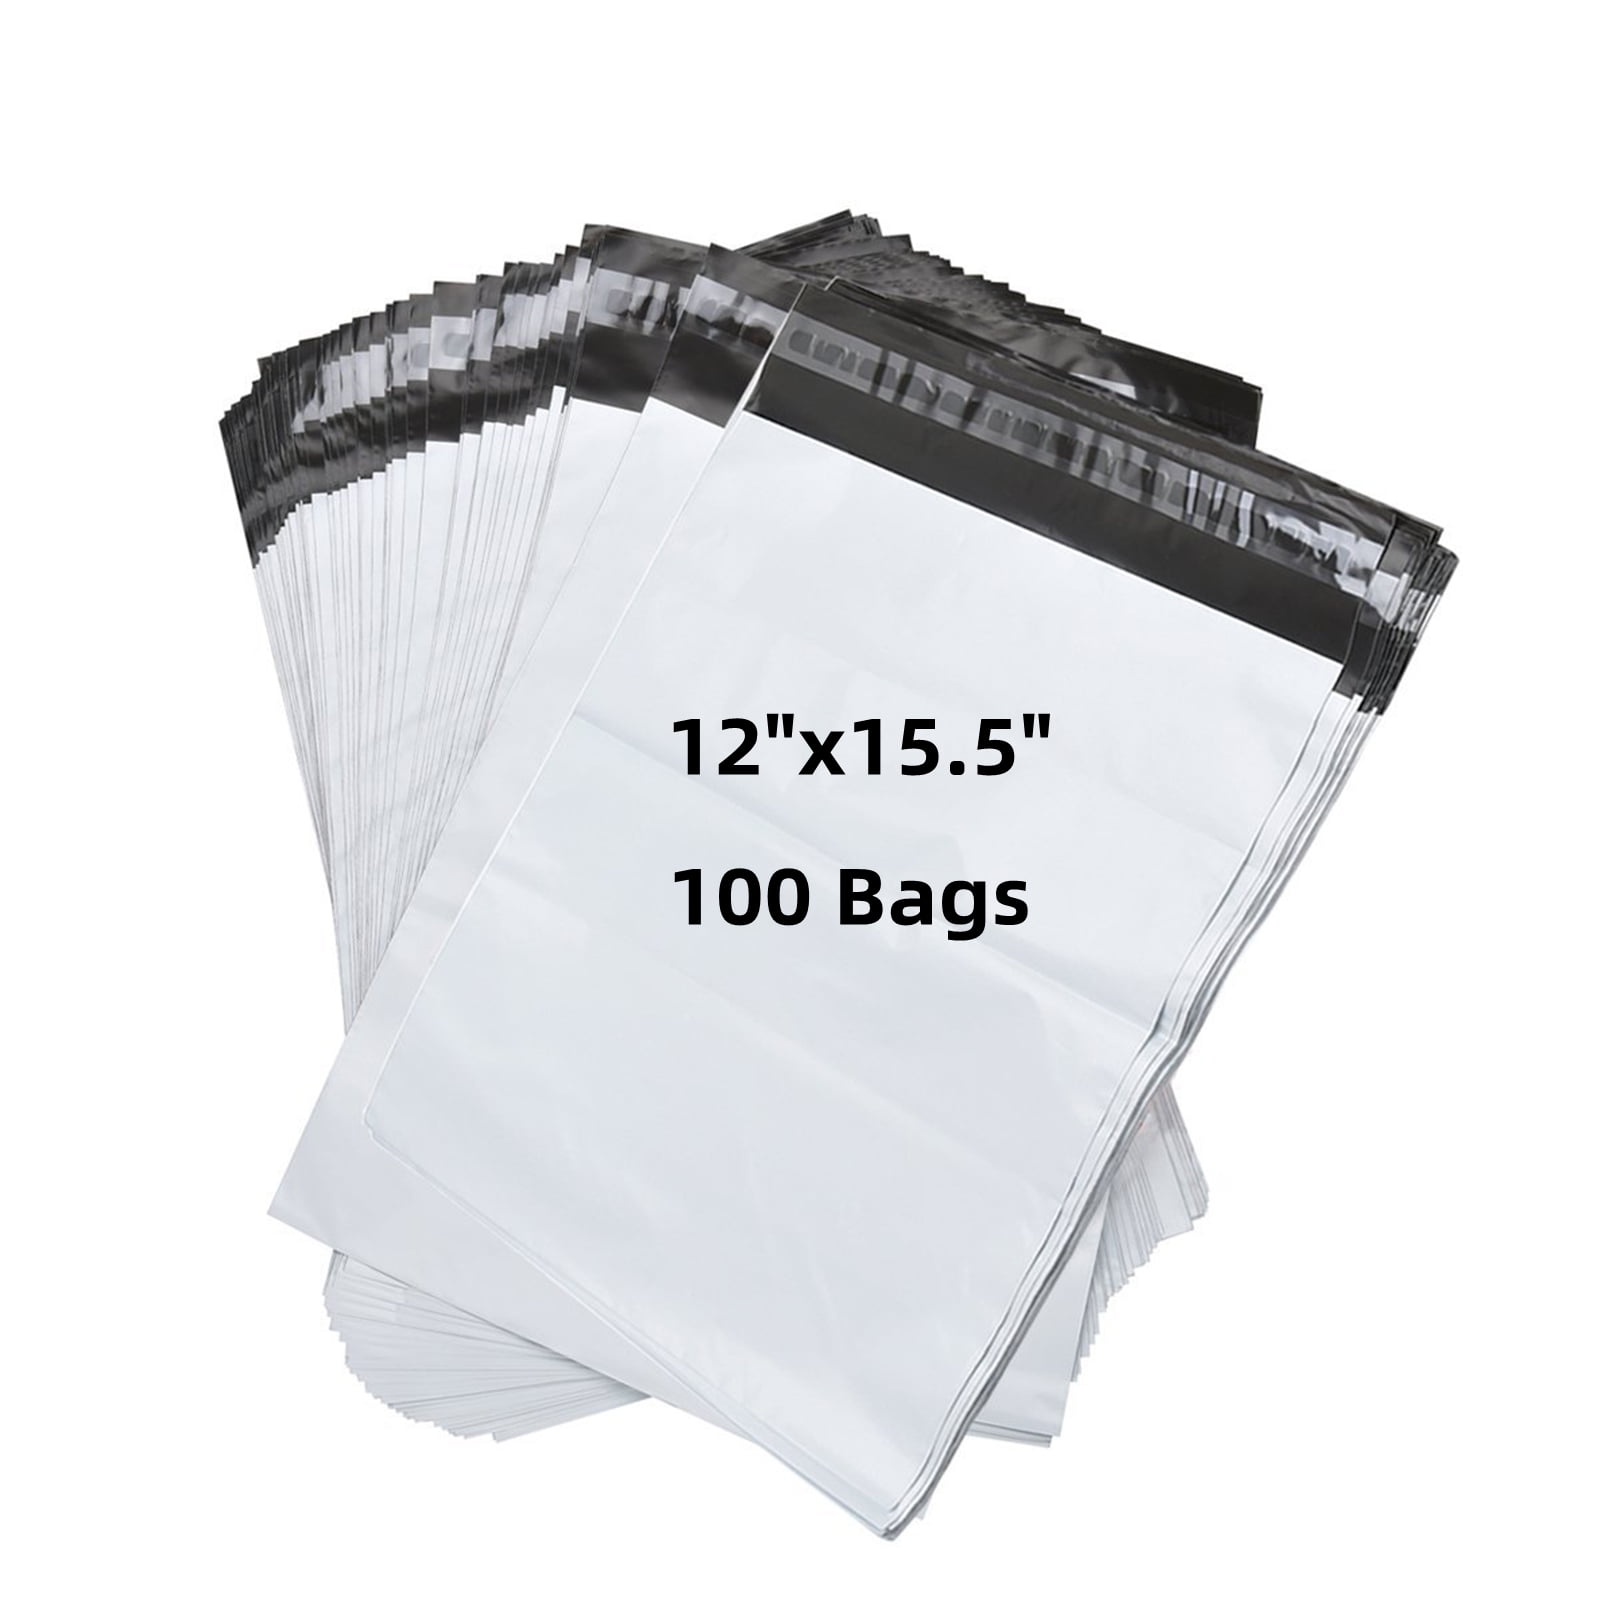 FungLam 100pcs Poly Mailer 12x15.5 Envelope Plastic Shipping Bags ...